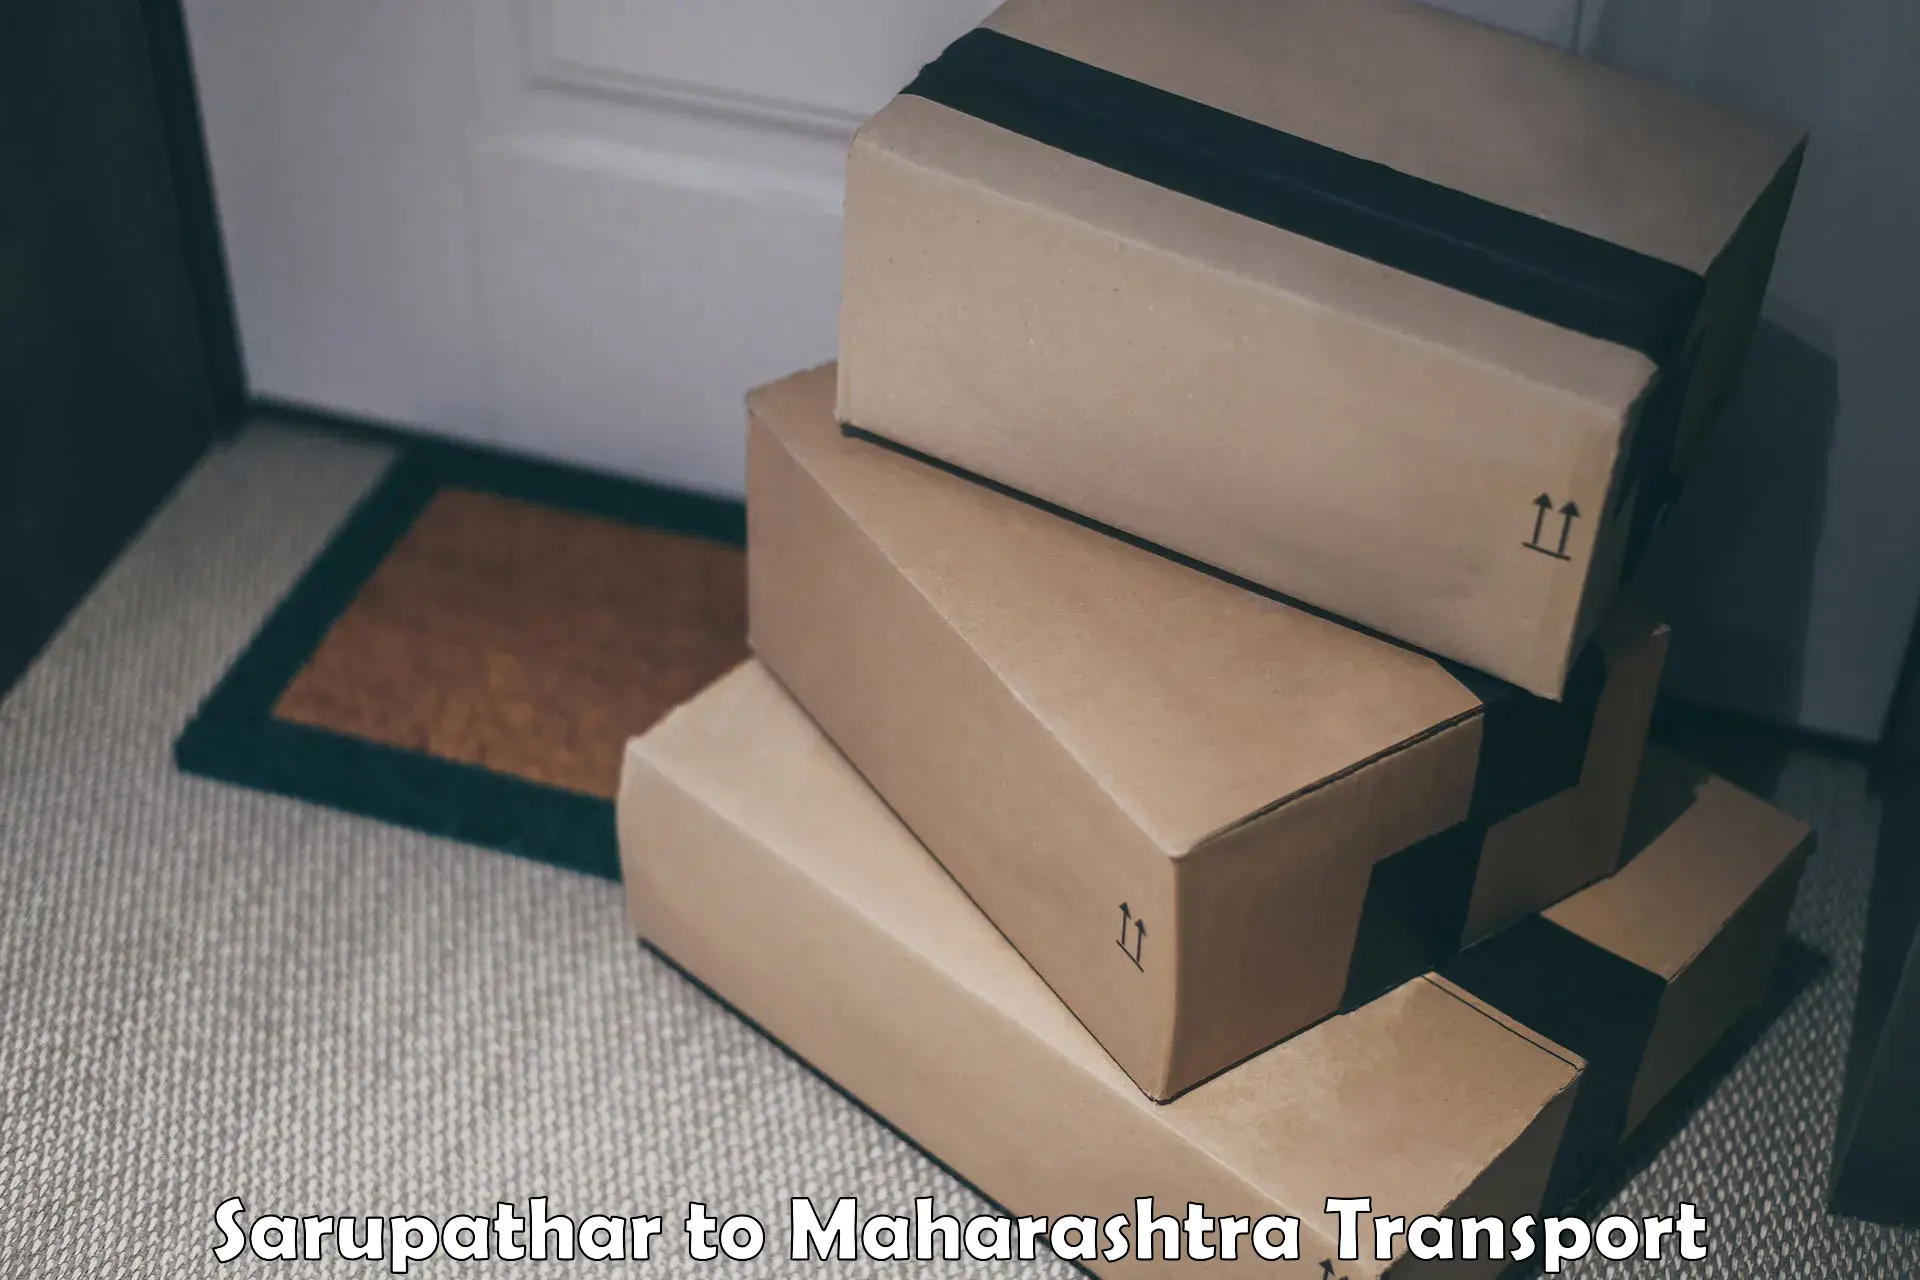 Truck transport companies in India Sarupathar to Pune